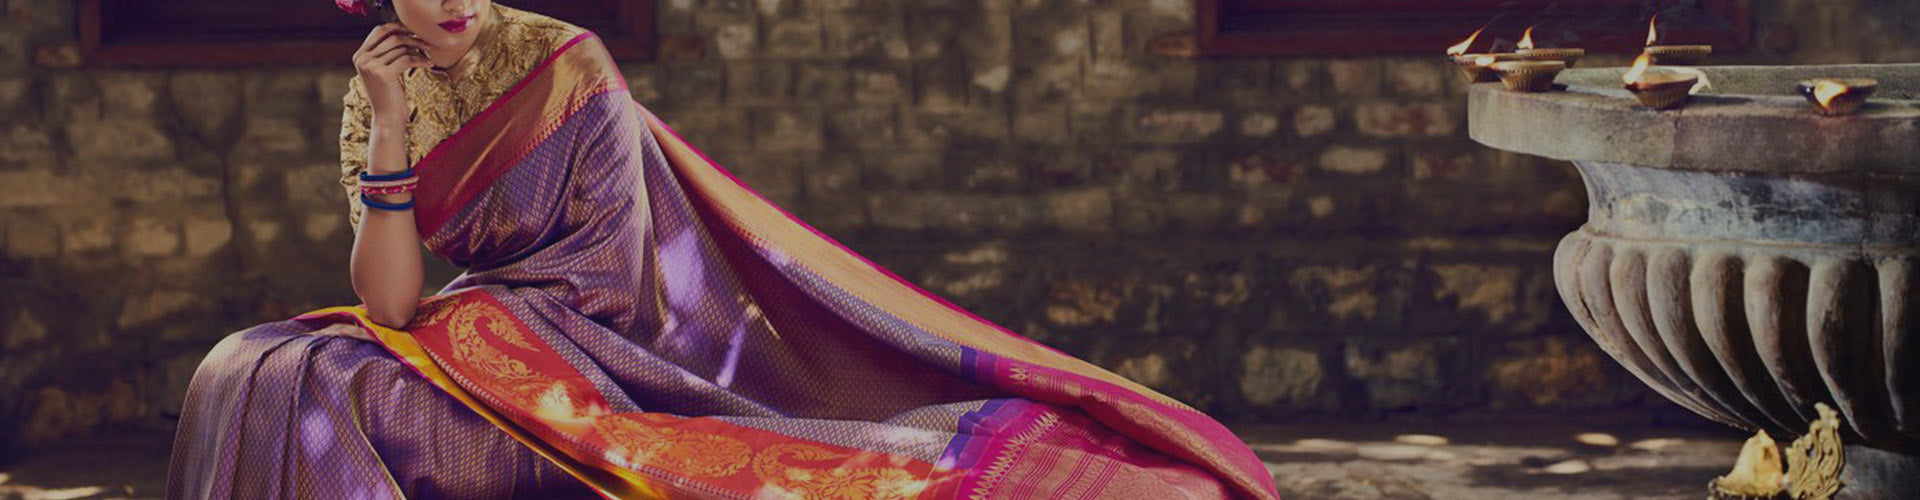 Buy Latest Wedding Sarees for Women Online in India